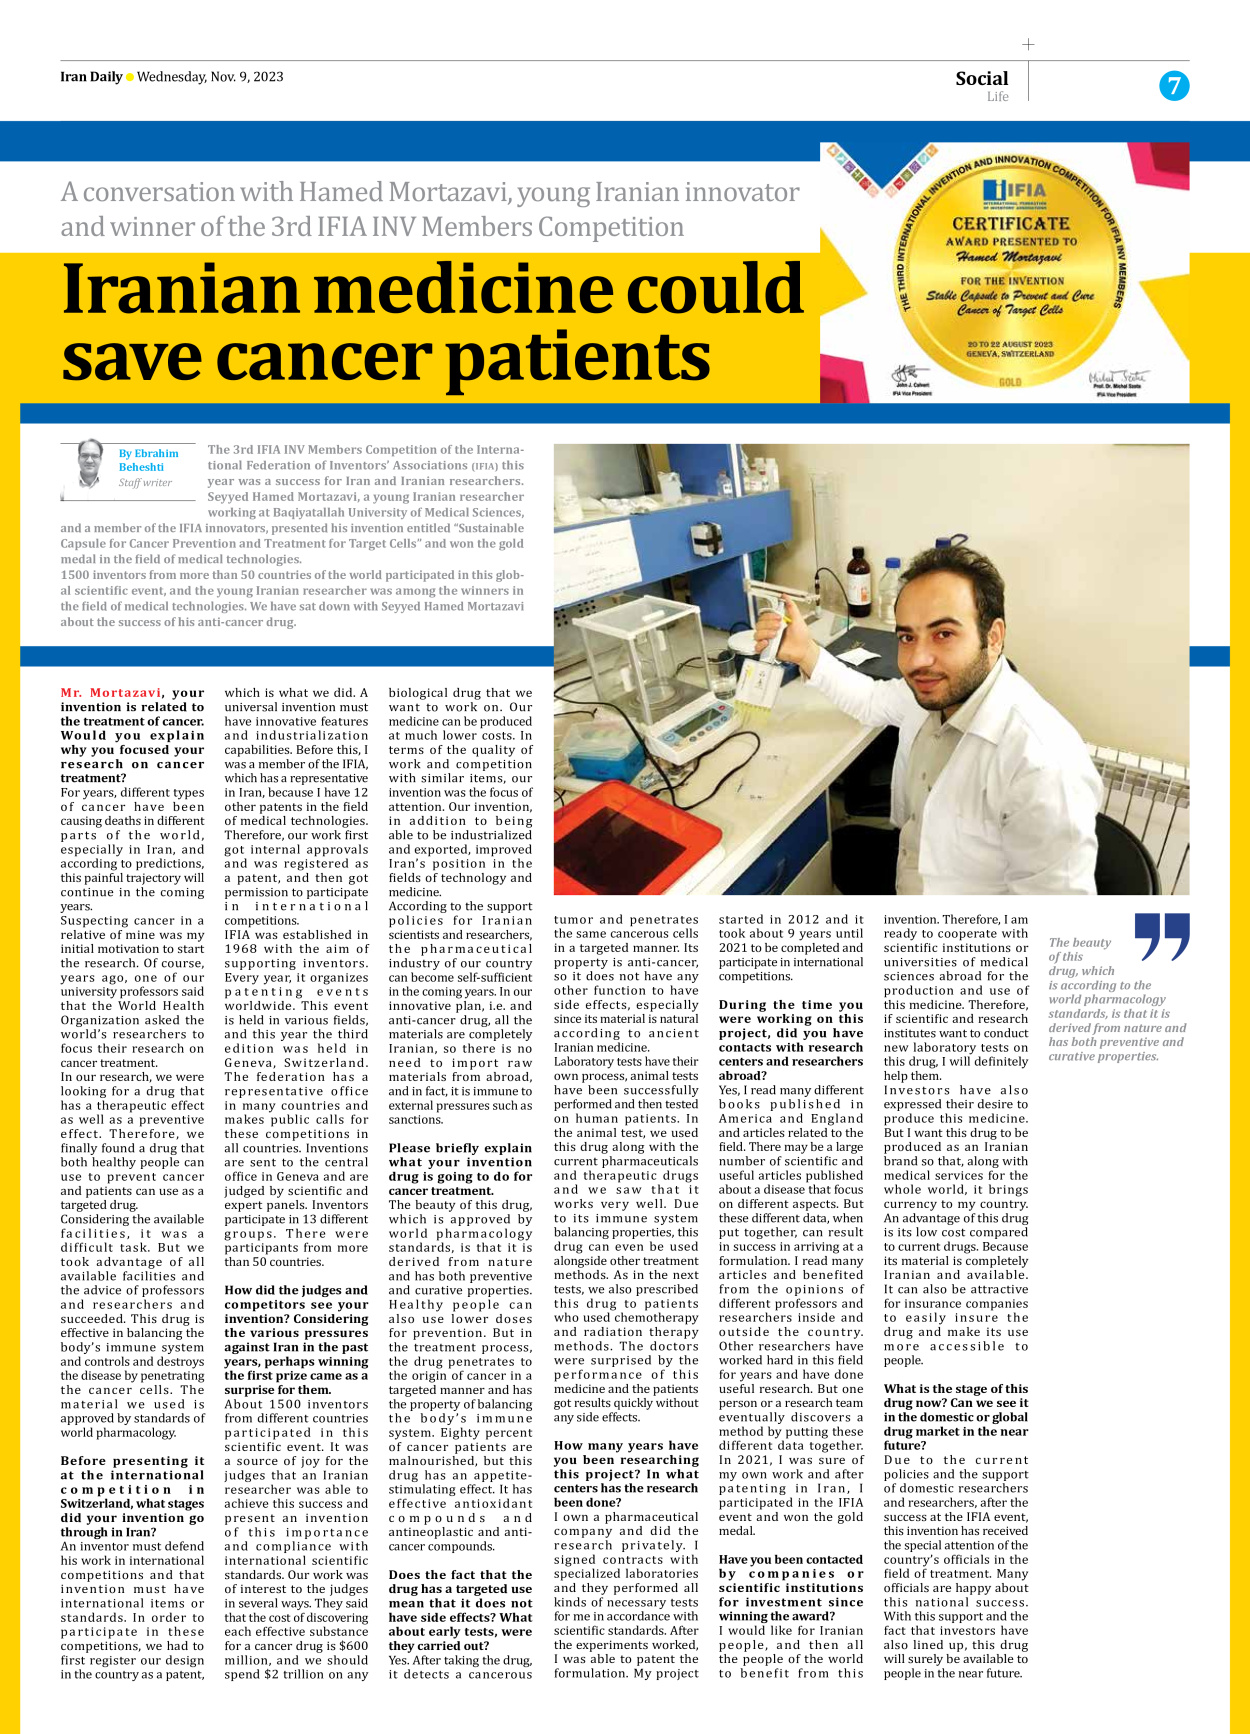 Iran Daily - Number Seven Thousand Four Hundred and Thirty - 09 November 2023 - Page 7